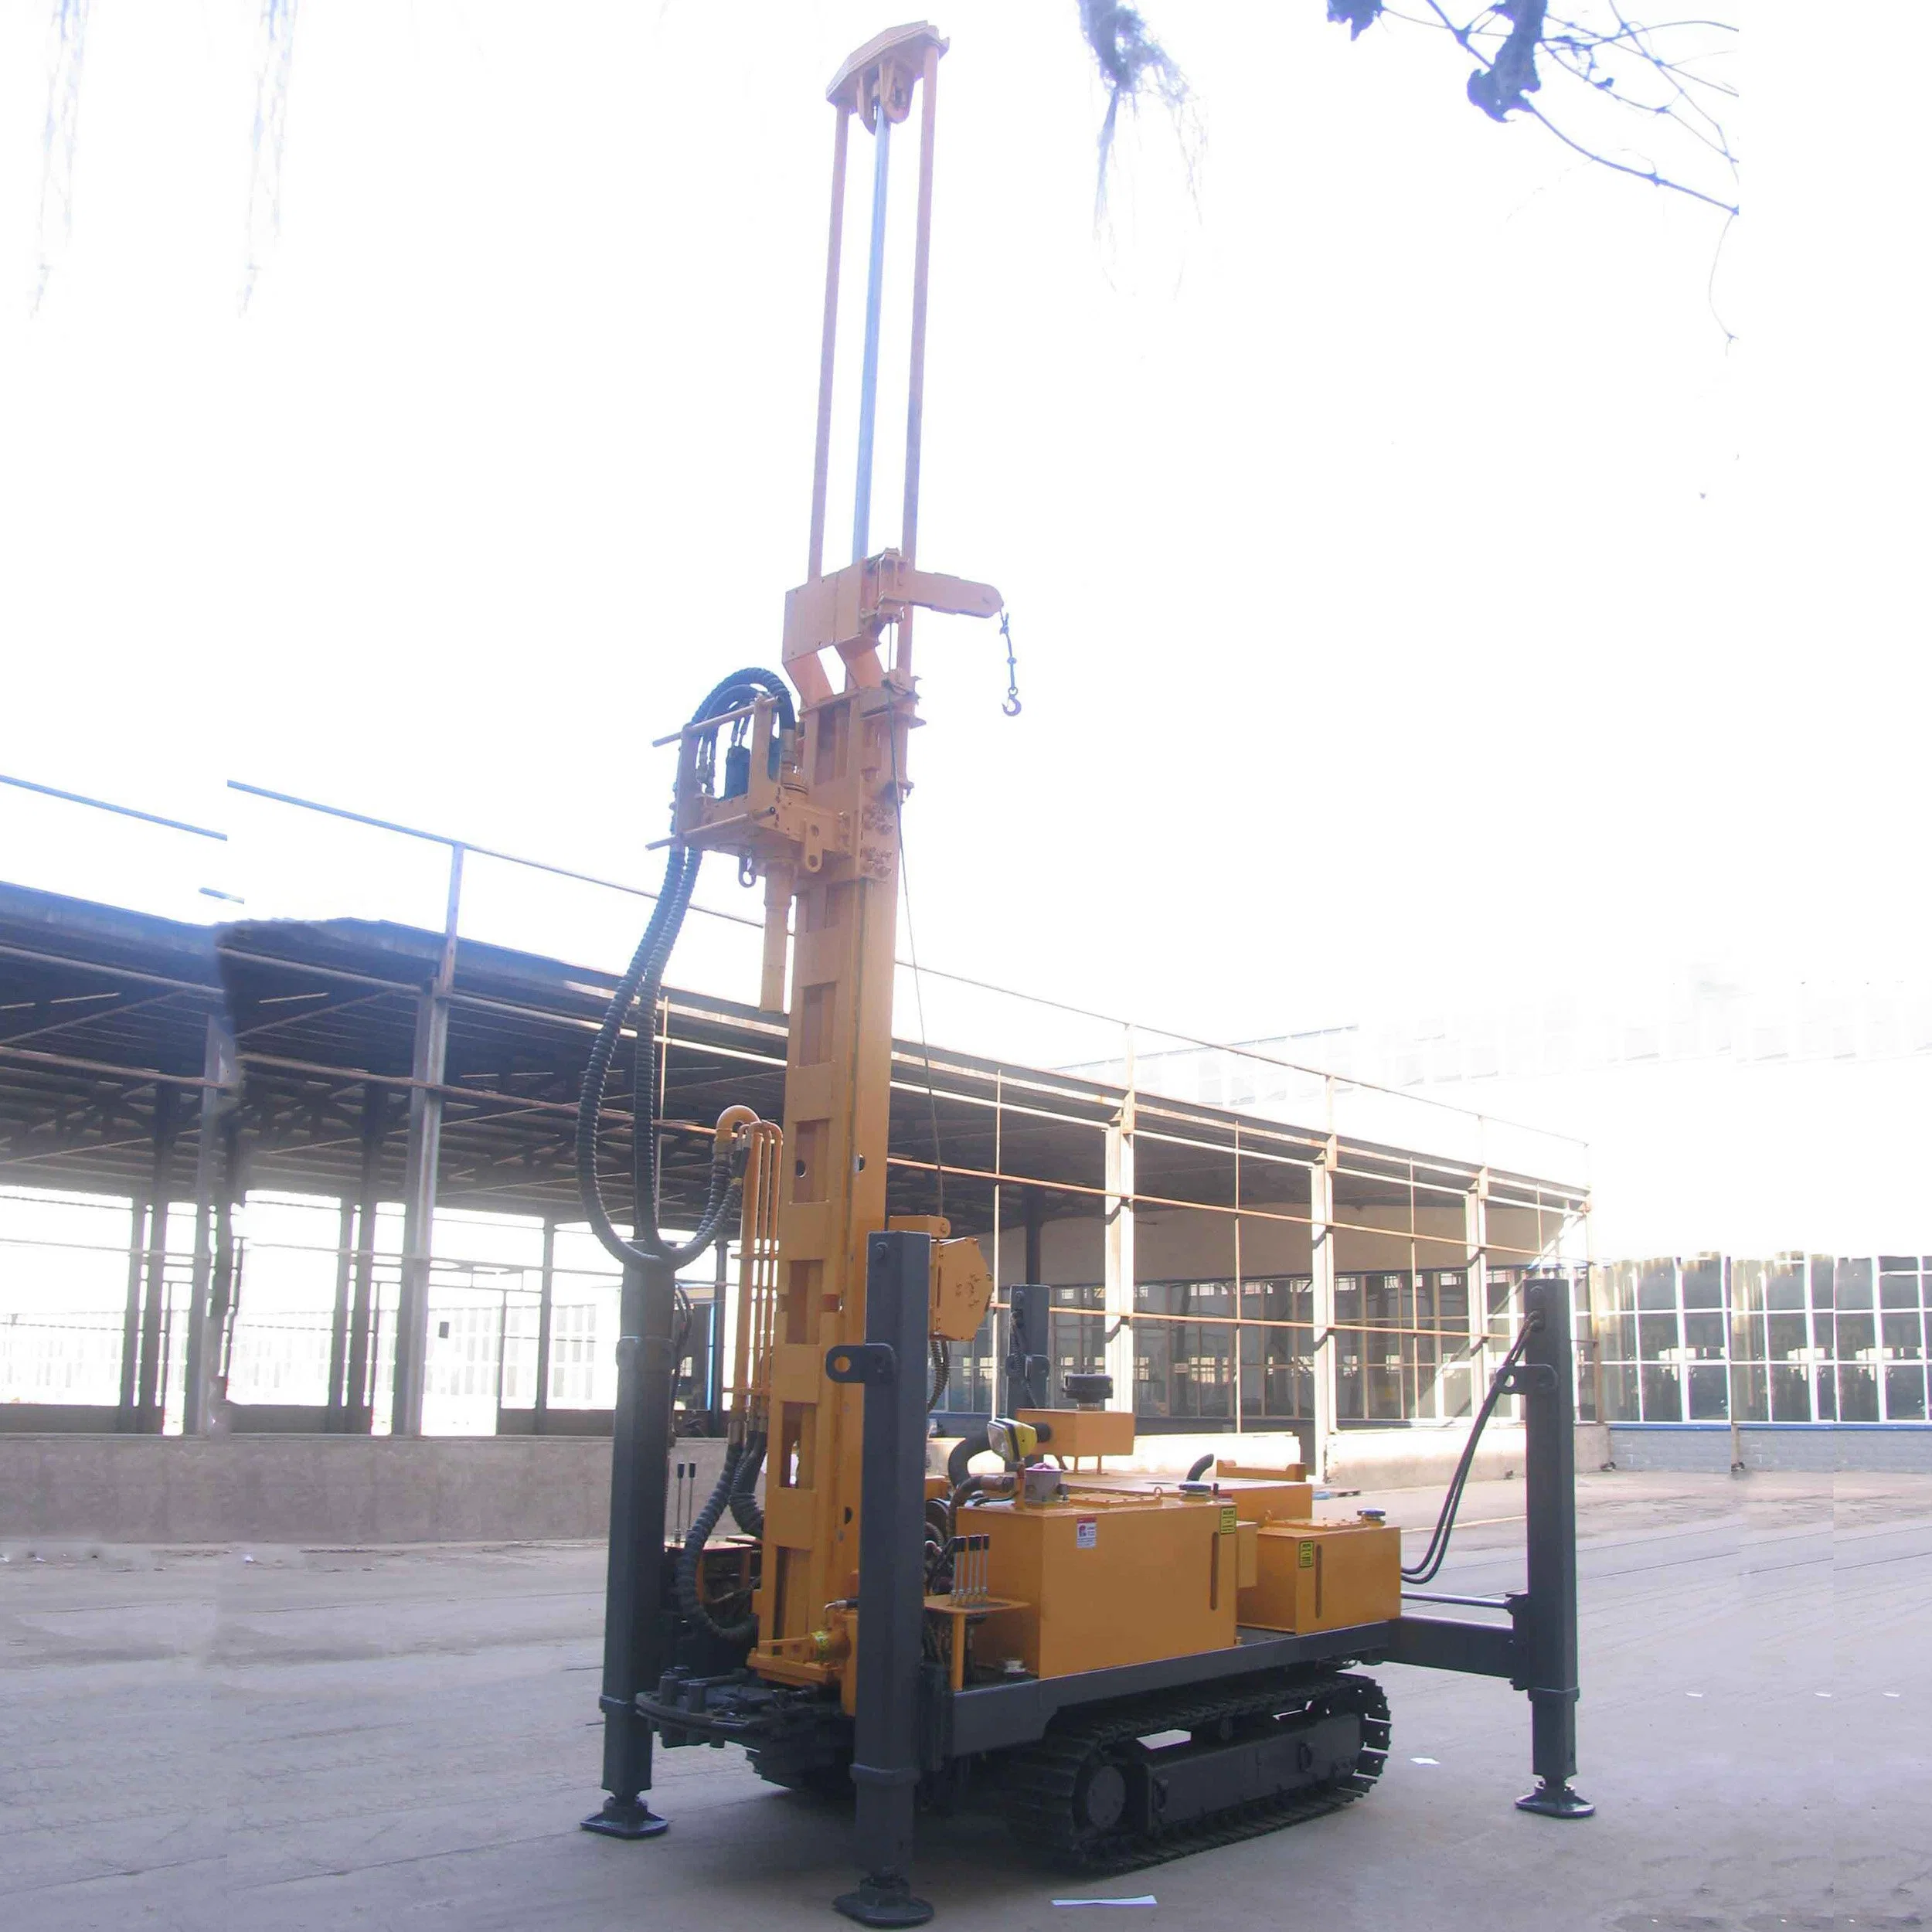 250m Depth Crawler Water Well Drill/Drilling Rig for Sale